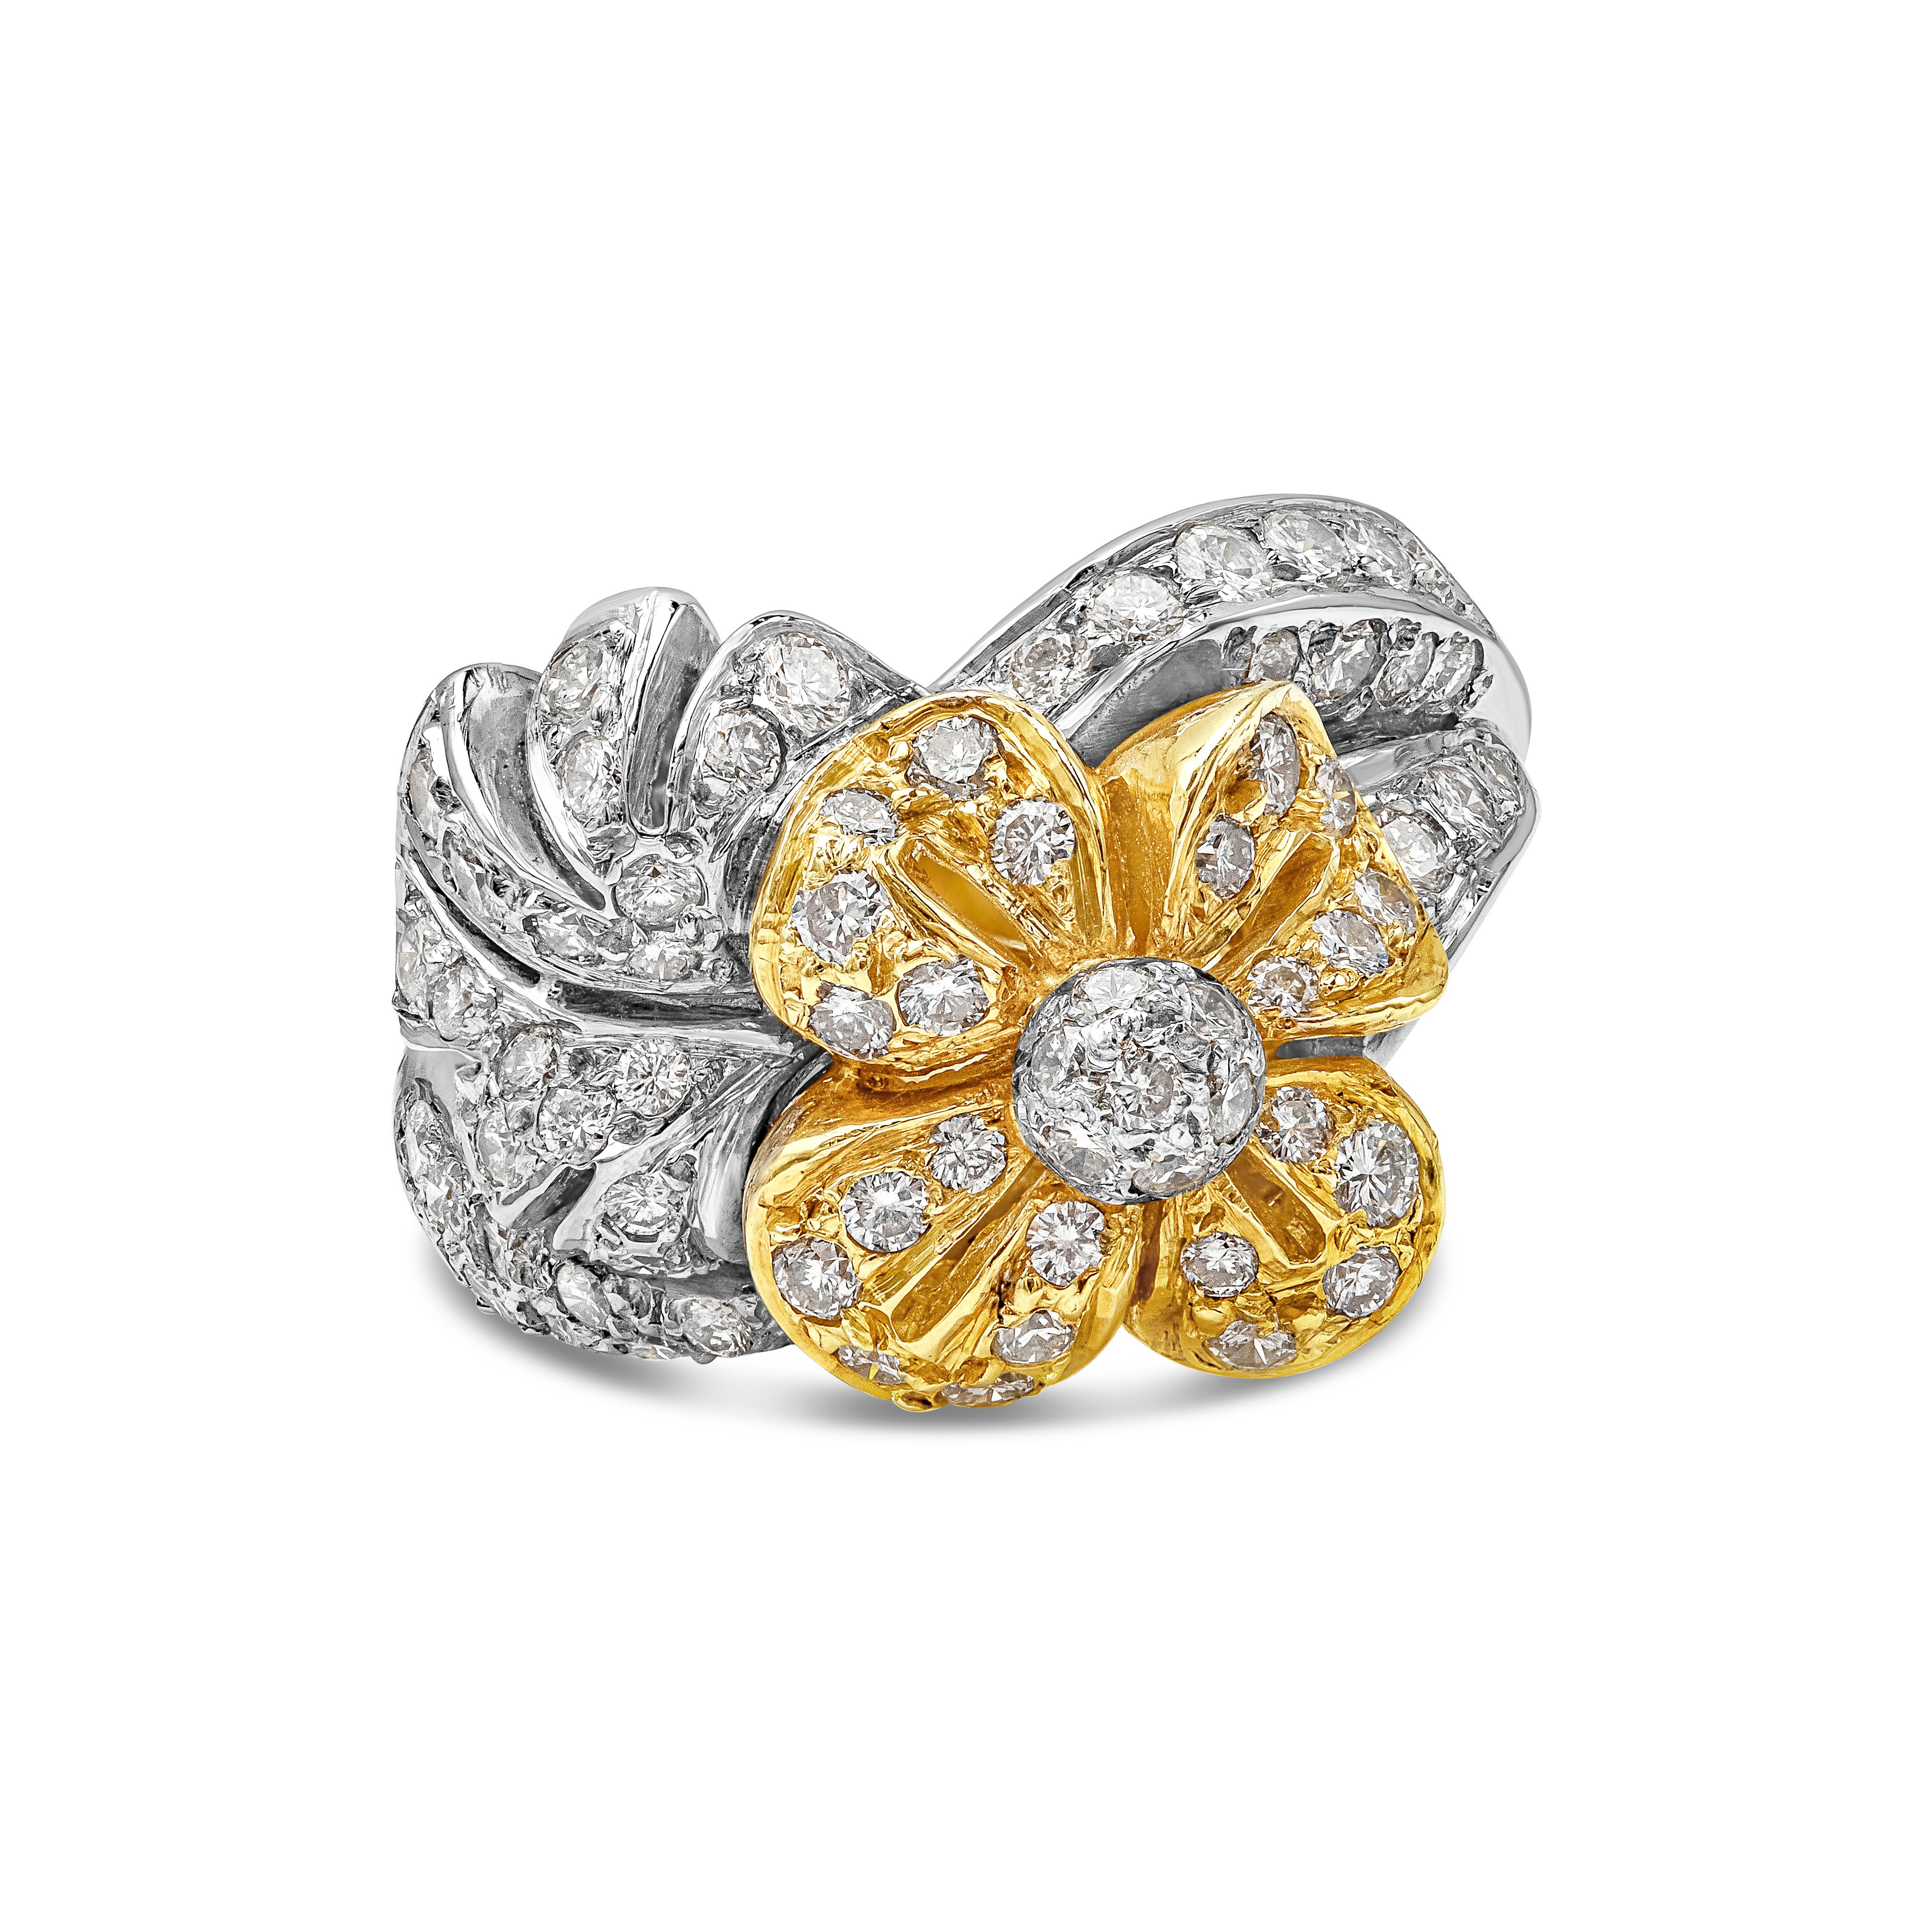 Showcasing a fascinating fashion ring set in a beautiful floral-motif design with 72 brilliant round diamonds weighing 1.09 carats total. Finely made in 18K White and Yellow Gold. Size 7 US resizable upon request.

Roman Malakov is a custom house,